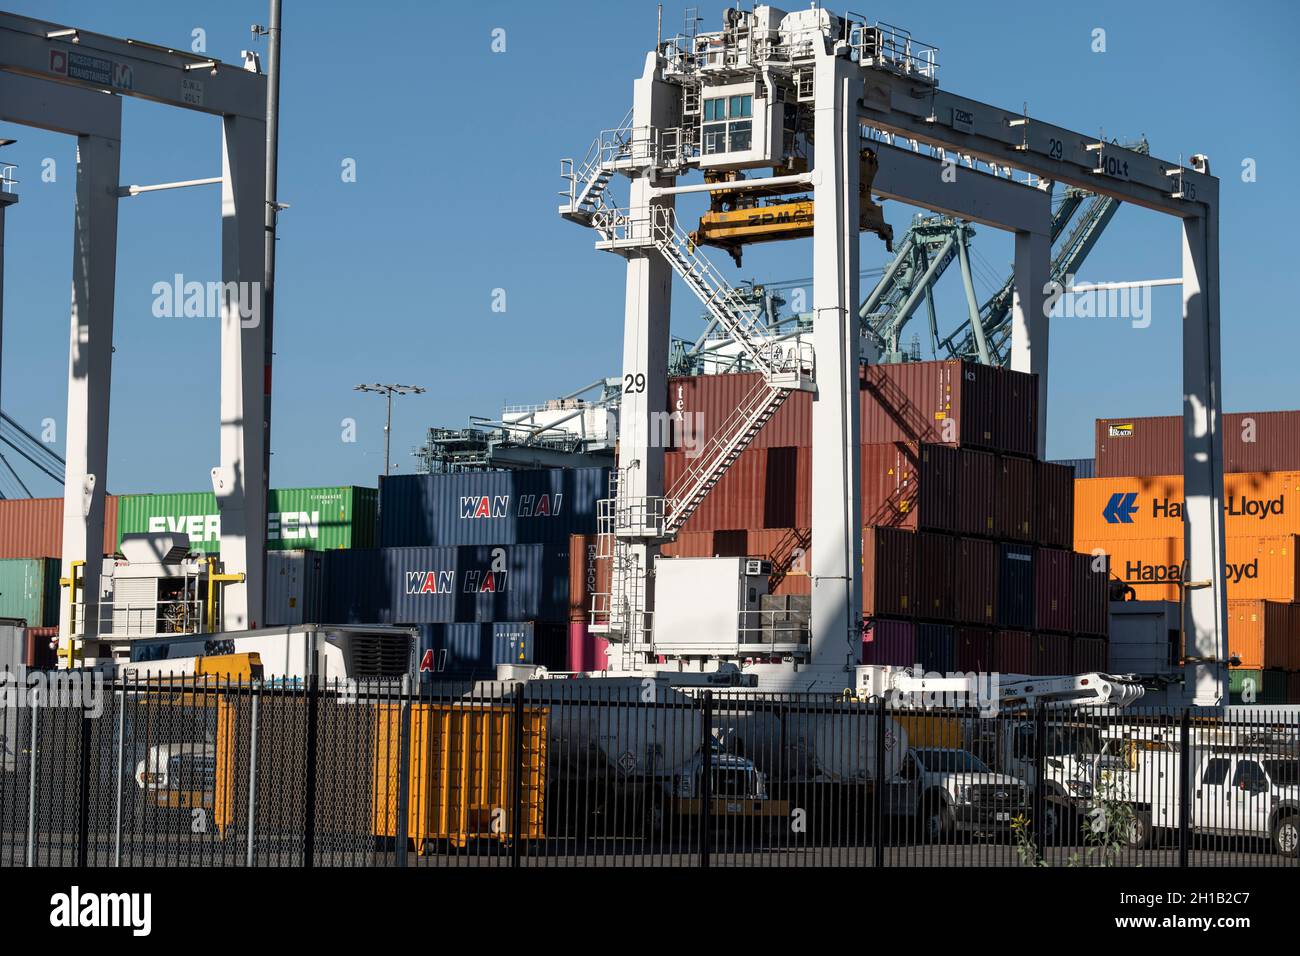 Los Angeles, CA USA - July 16, 2021: Shipping containers piled high at the Port of Los Angeles during supply chain disruption Stock Photo